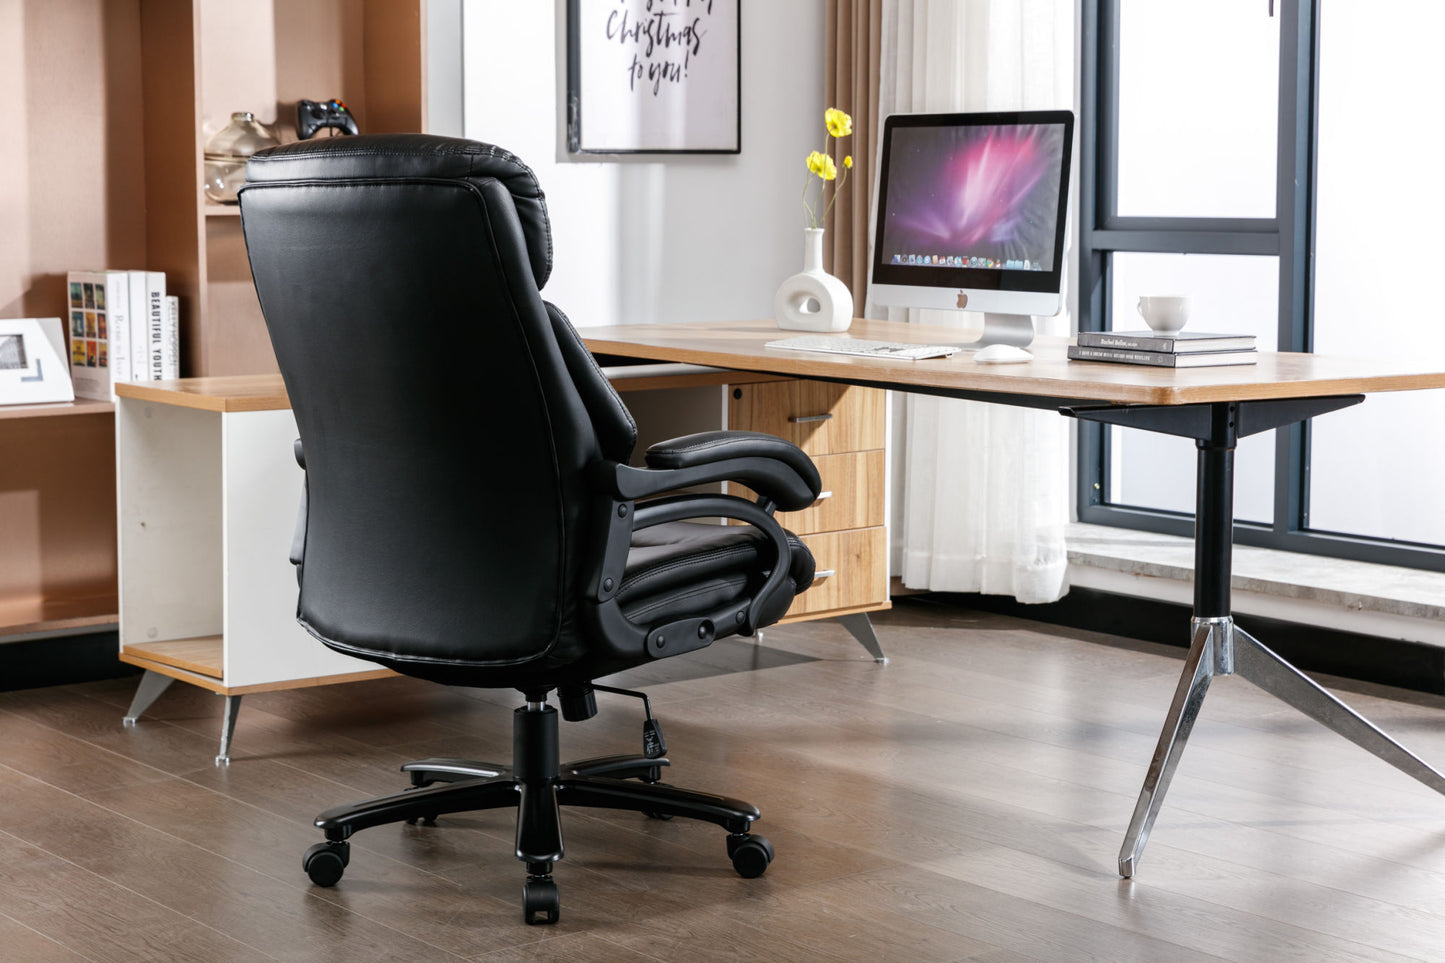 Leather office Chair ; PU faux leather;  till function 90-110 degree; black color max uploaded 400LBS